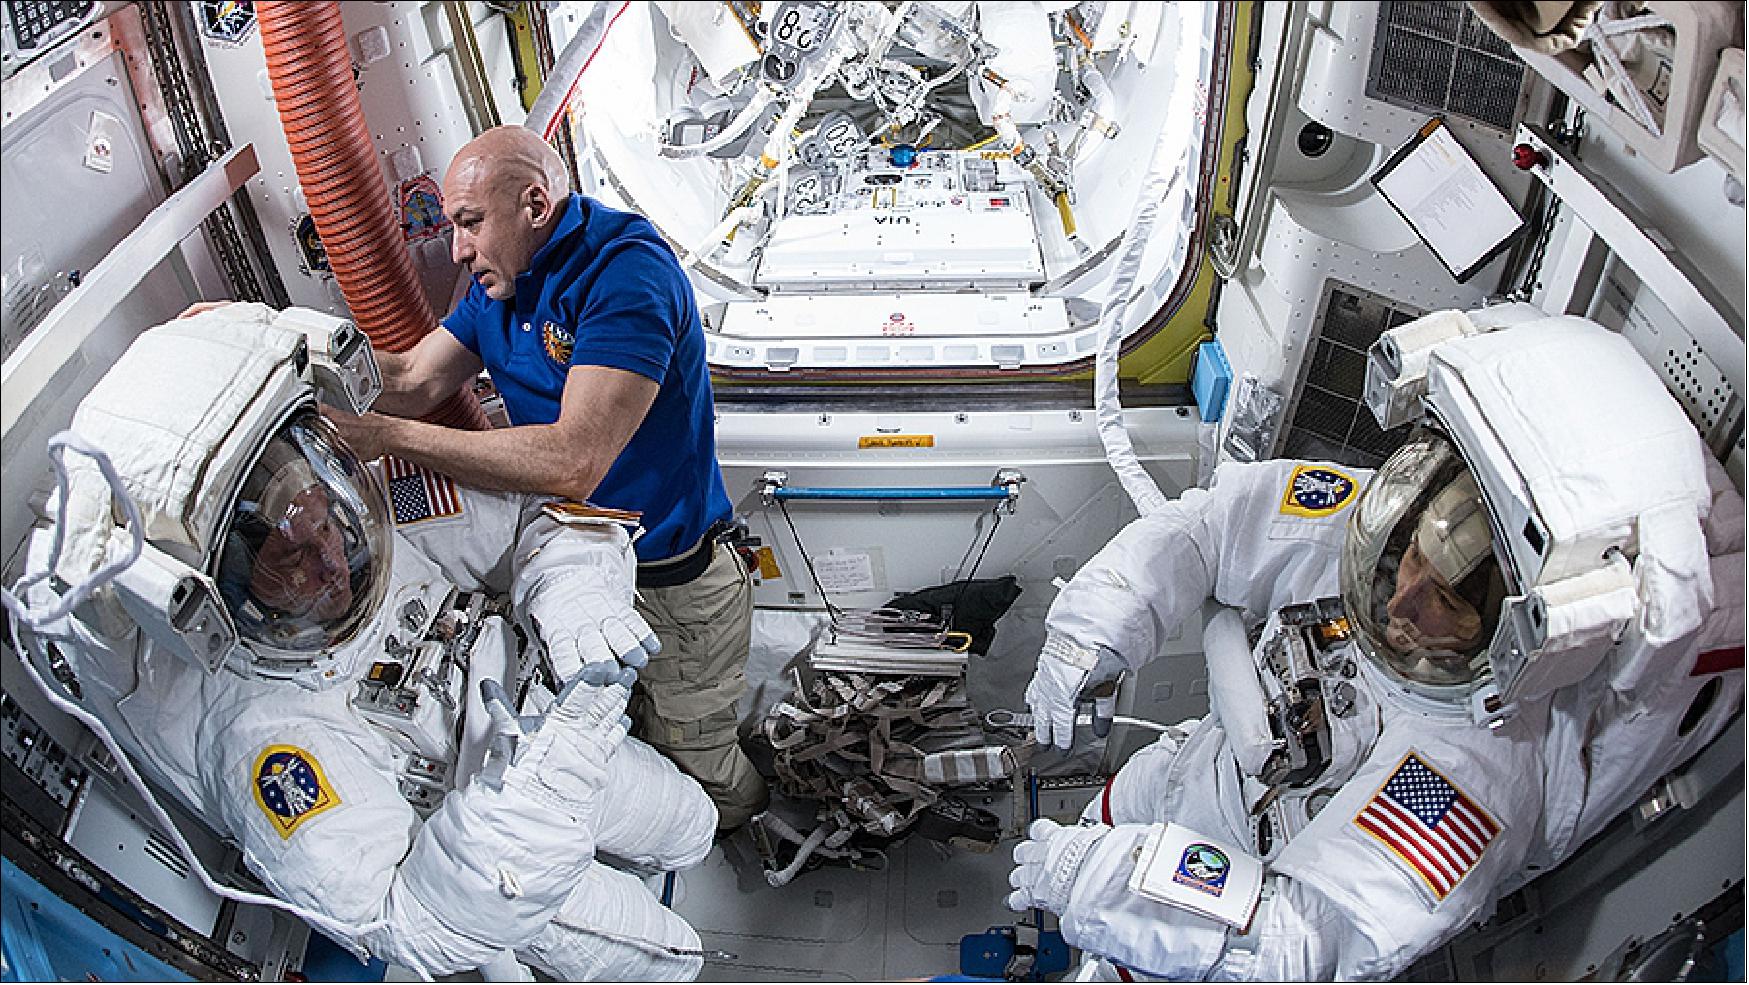 Figure 40: Expedition 61 Commander Luca Parmitano of ESA (European Space Agency) assists NASA astronauts Andrew Morgan (left) and Christina Koch (right) in their U.S. spacesuits (image credit: NASA)